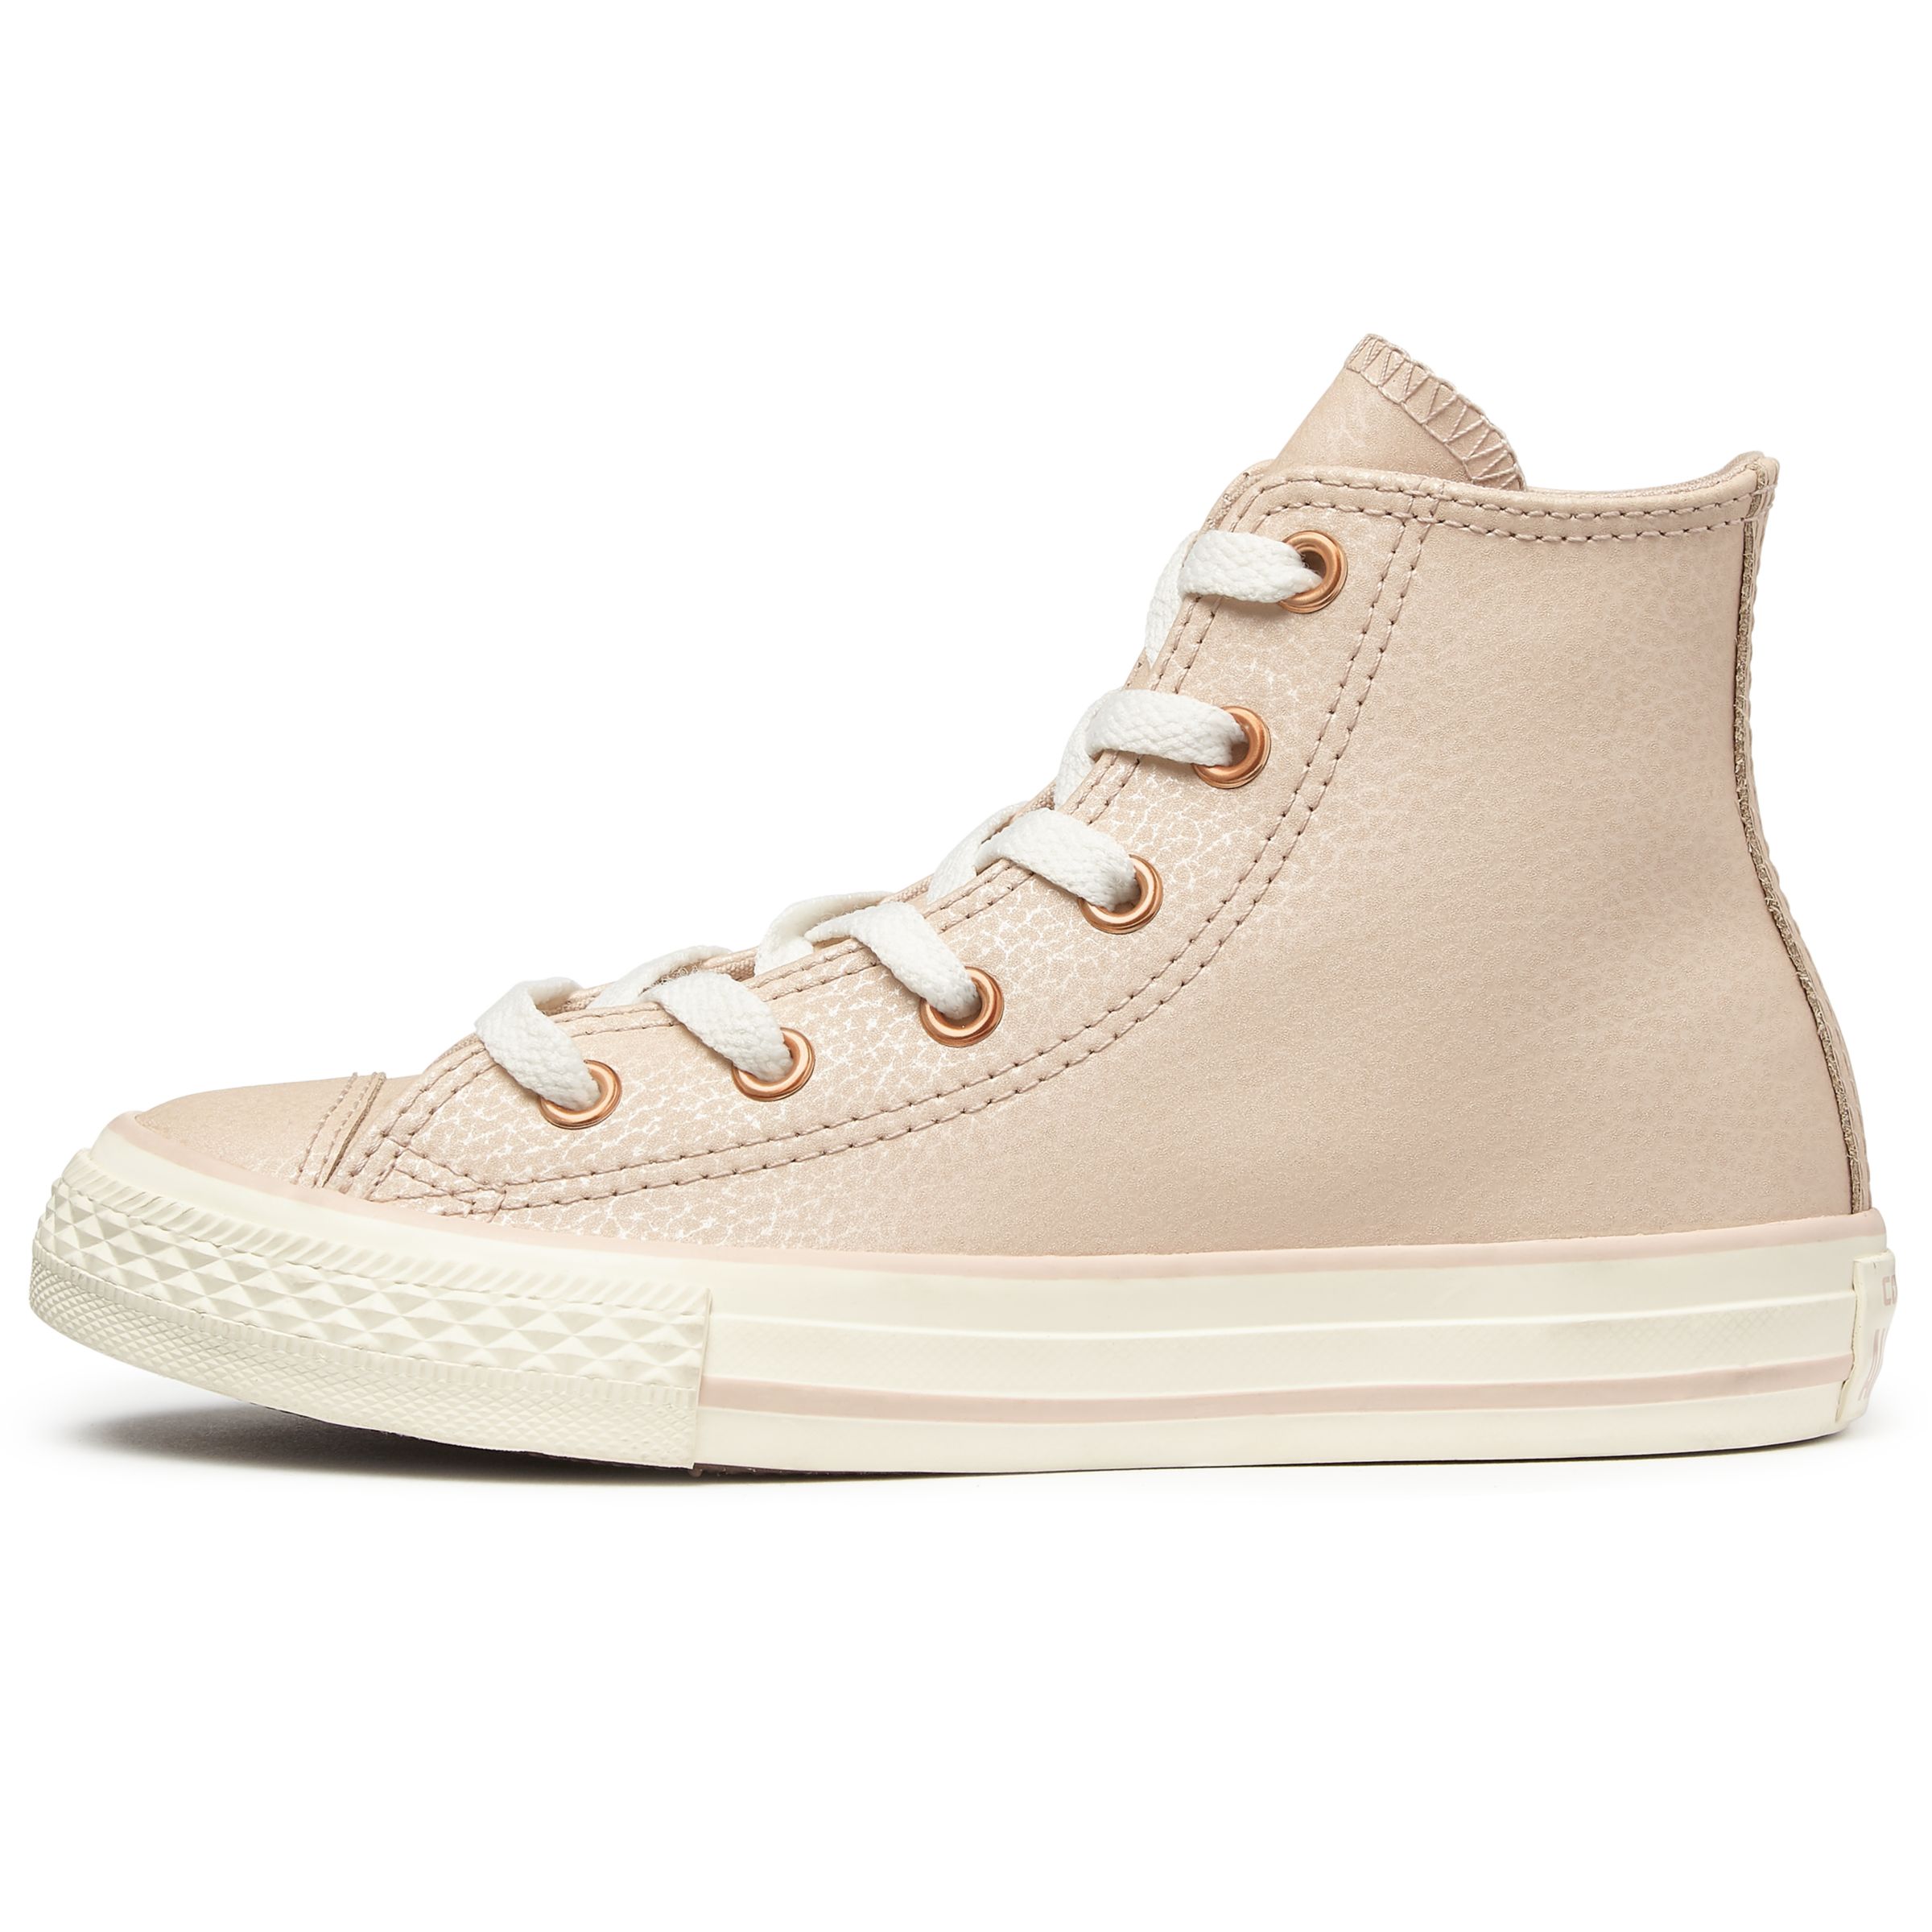 Converse Chuck Taylor All Star Hi-Top Trainers, Pink, 11 Jnr